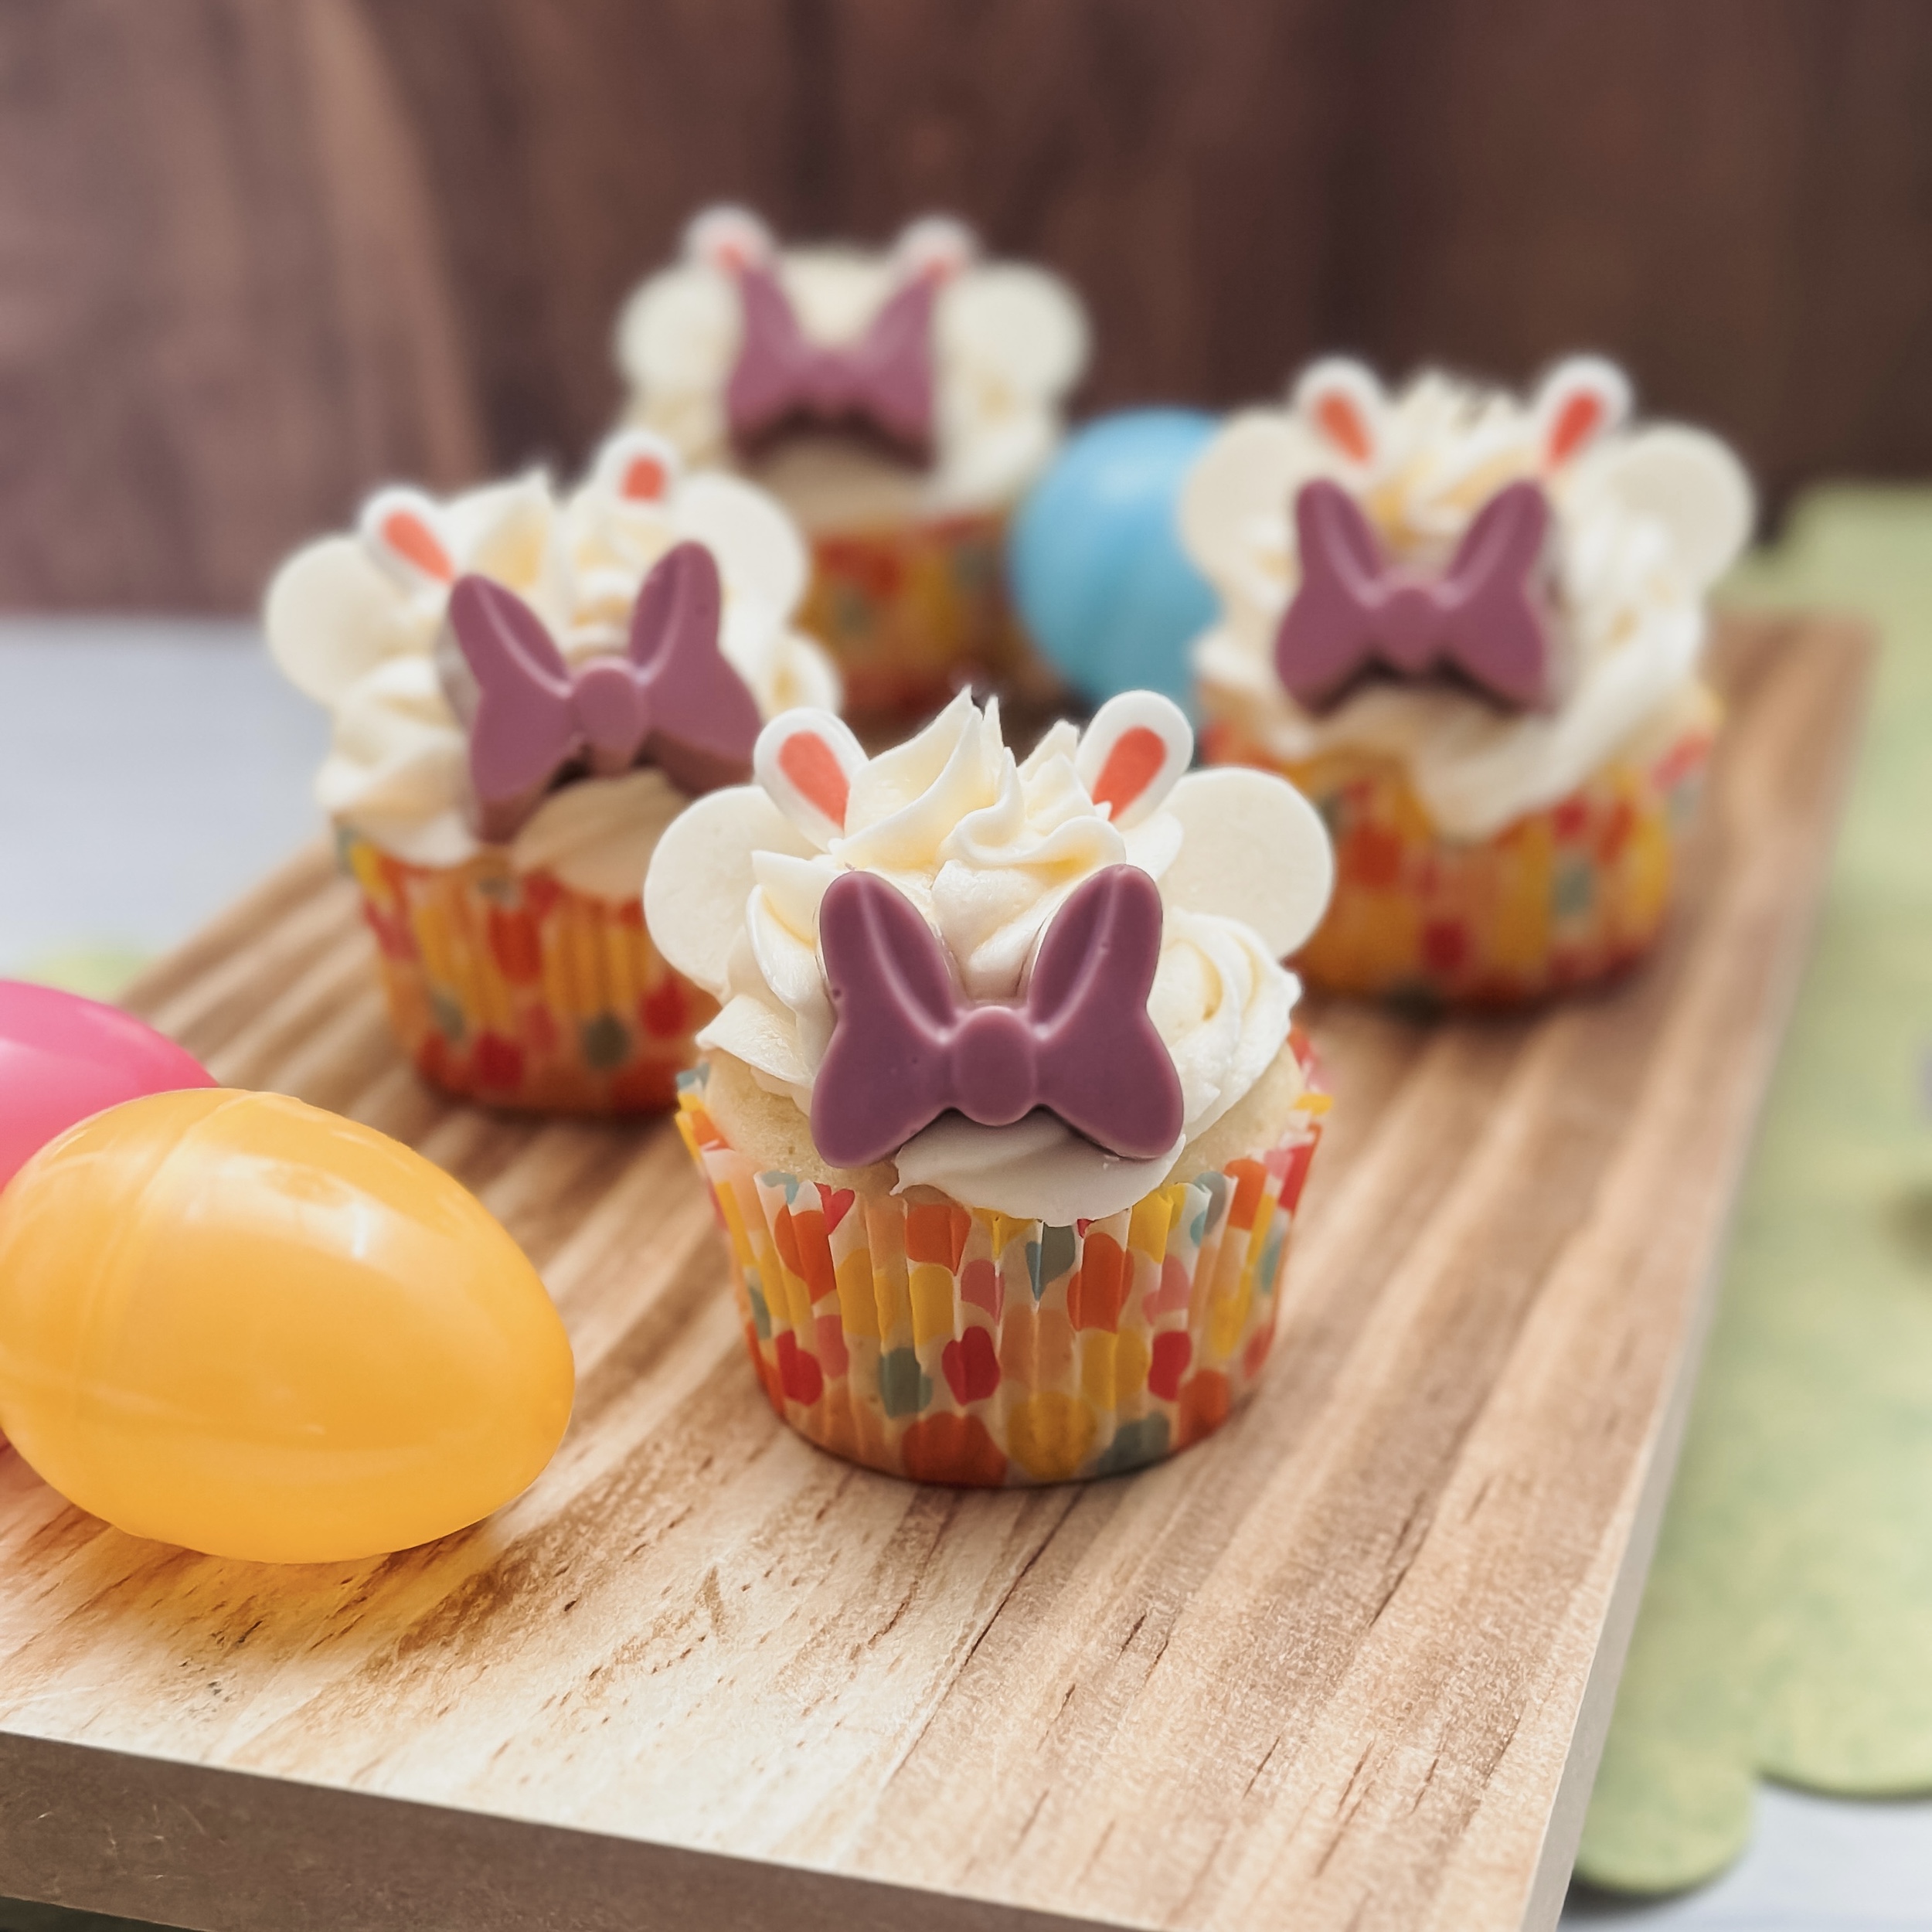 Minnie's Easter Bunny Cakes (vanilla cupcakes with white frosting, purple candy bow, minnie ears, and bunny ears)